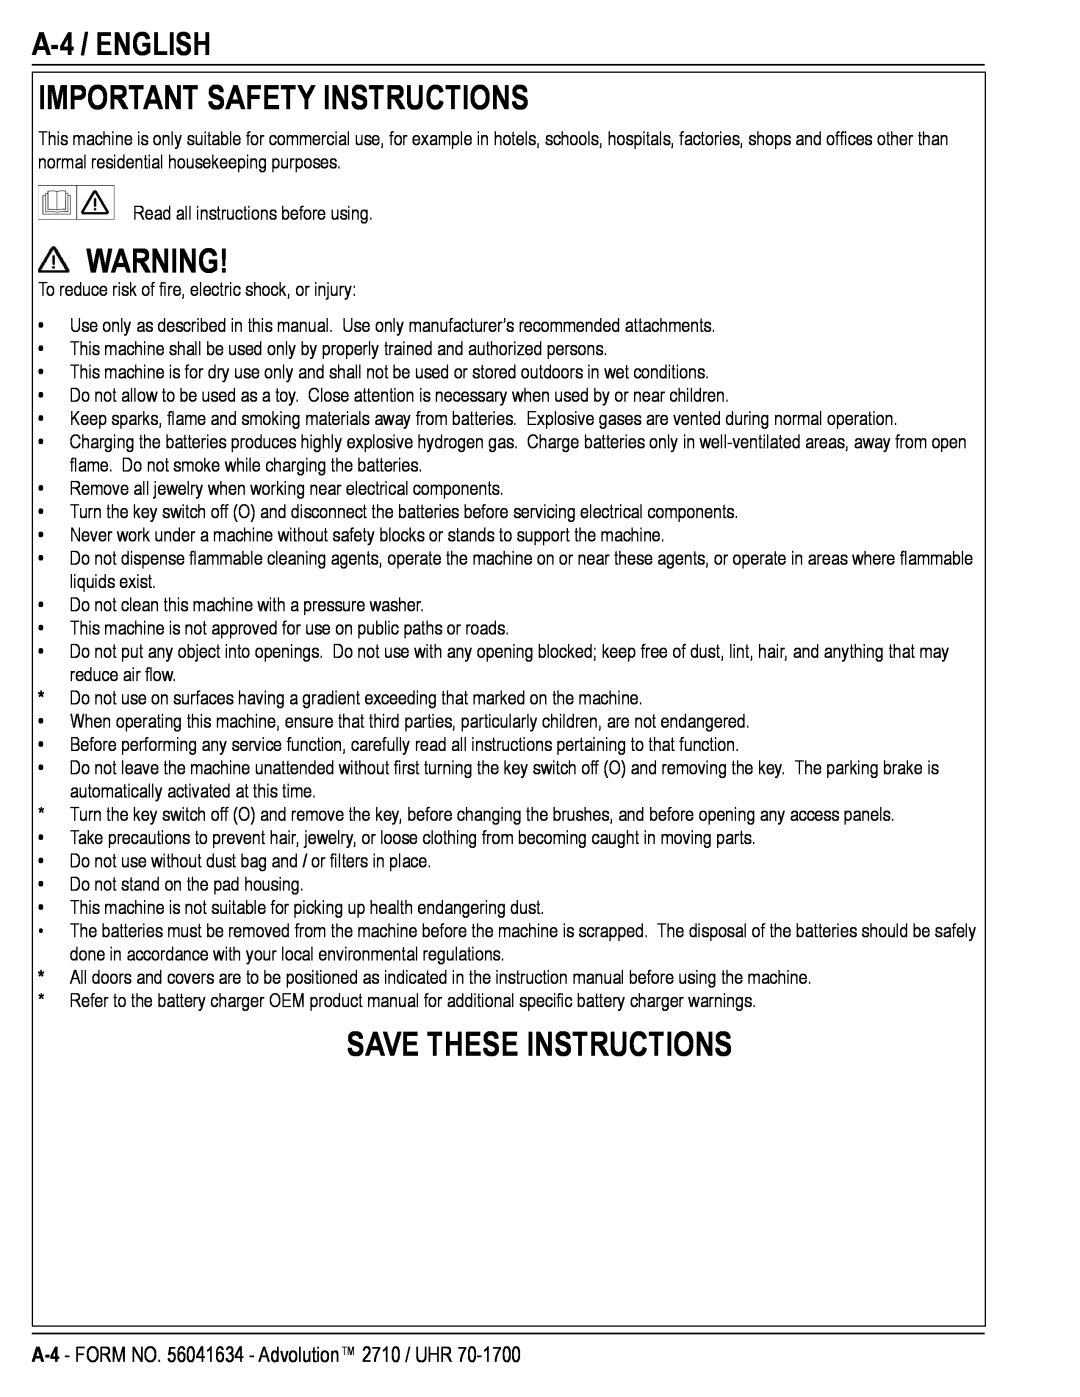 Nilfisk-Advance America 56422002, UHR 70-1700, 2710 Important Safety Instructions, Save These Instructions, A-4 / ENGLISH 